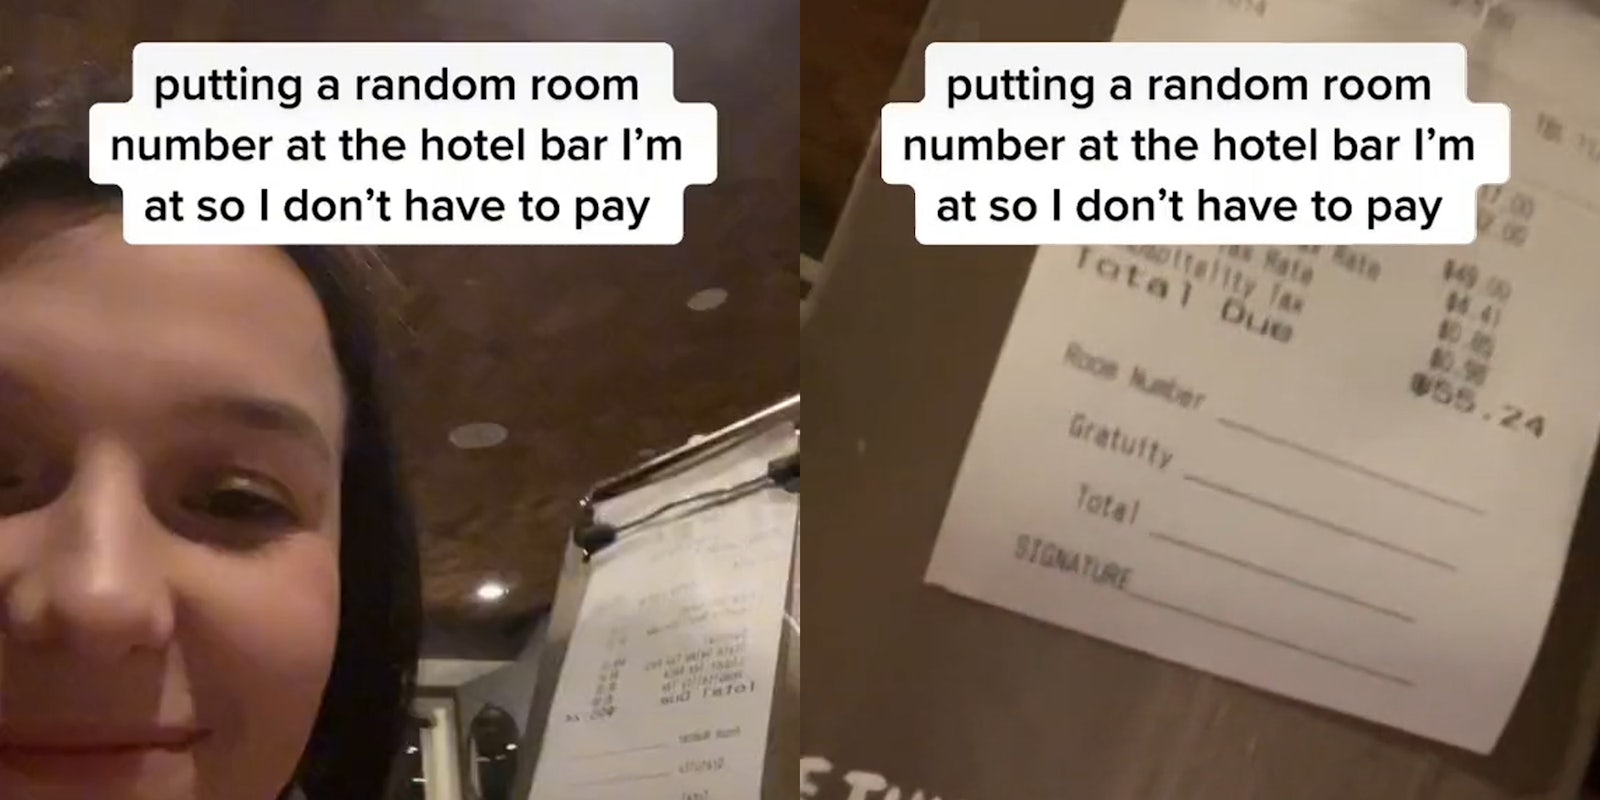 young woman smiling with receipt and caption 'putting a random room number at the hotel bar I'm at so I don't have to pay'